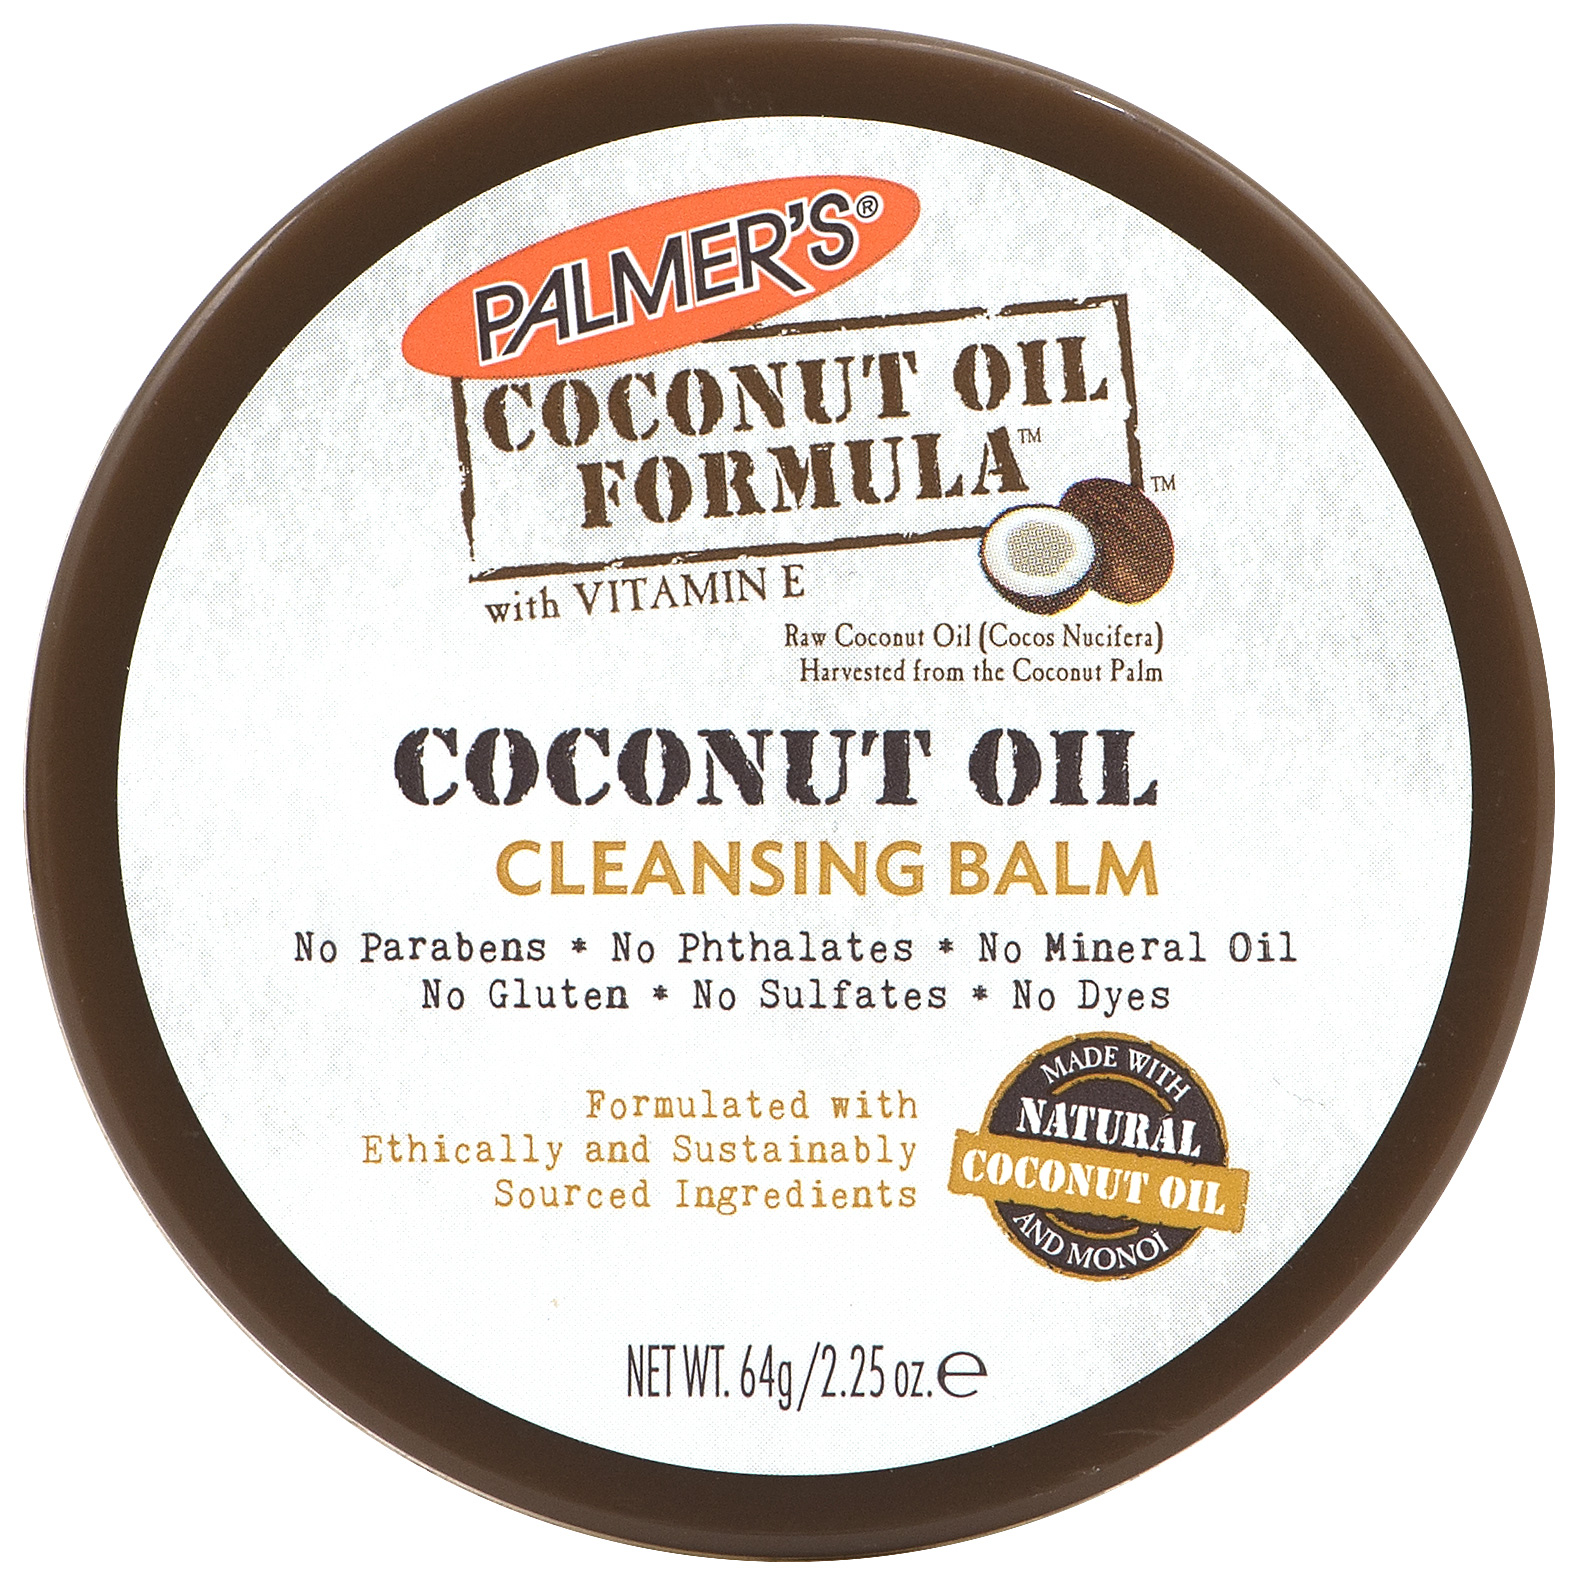 Palmers Coconut Oil Formula with Vitamin E Cleansing Balm